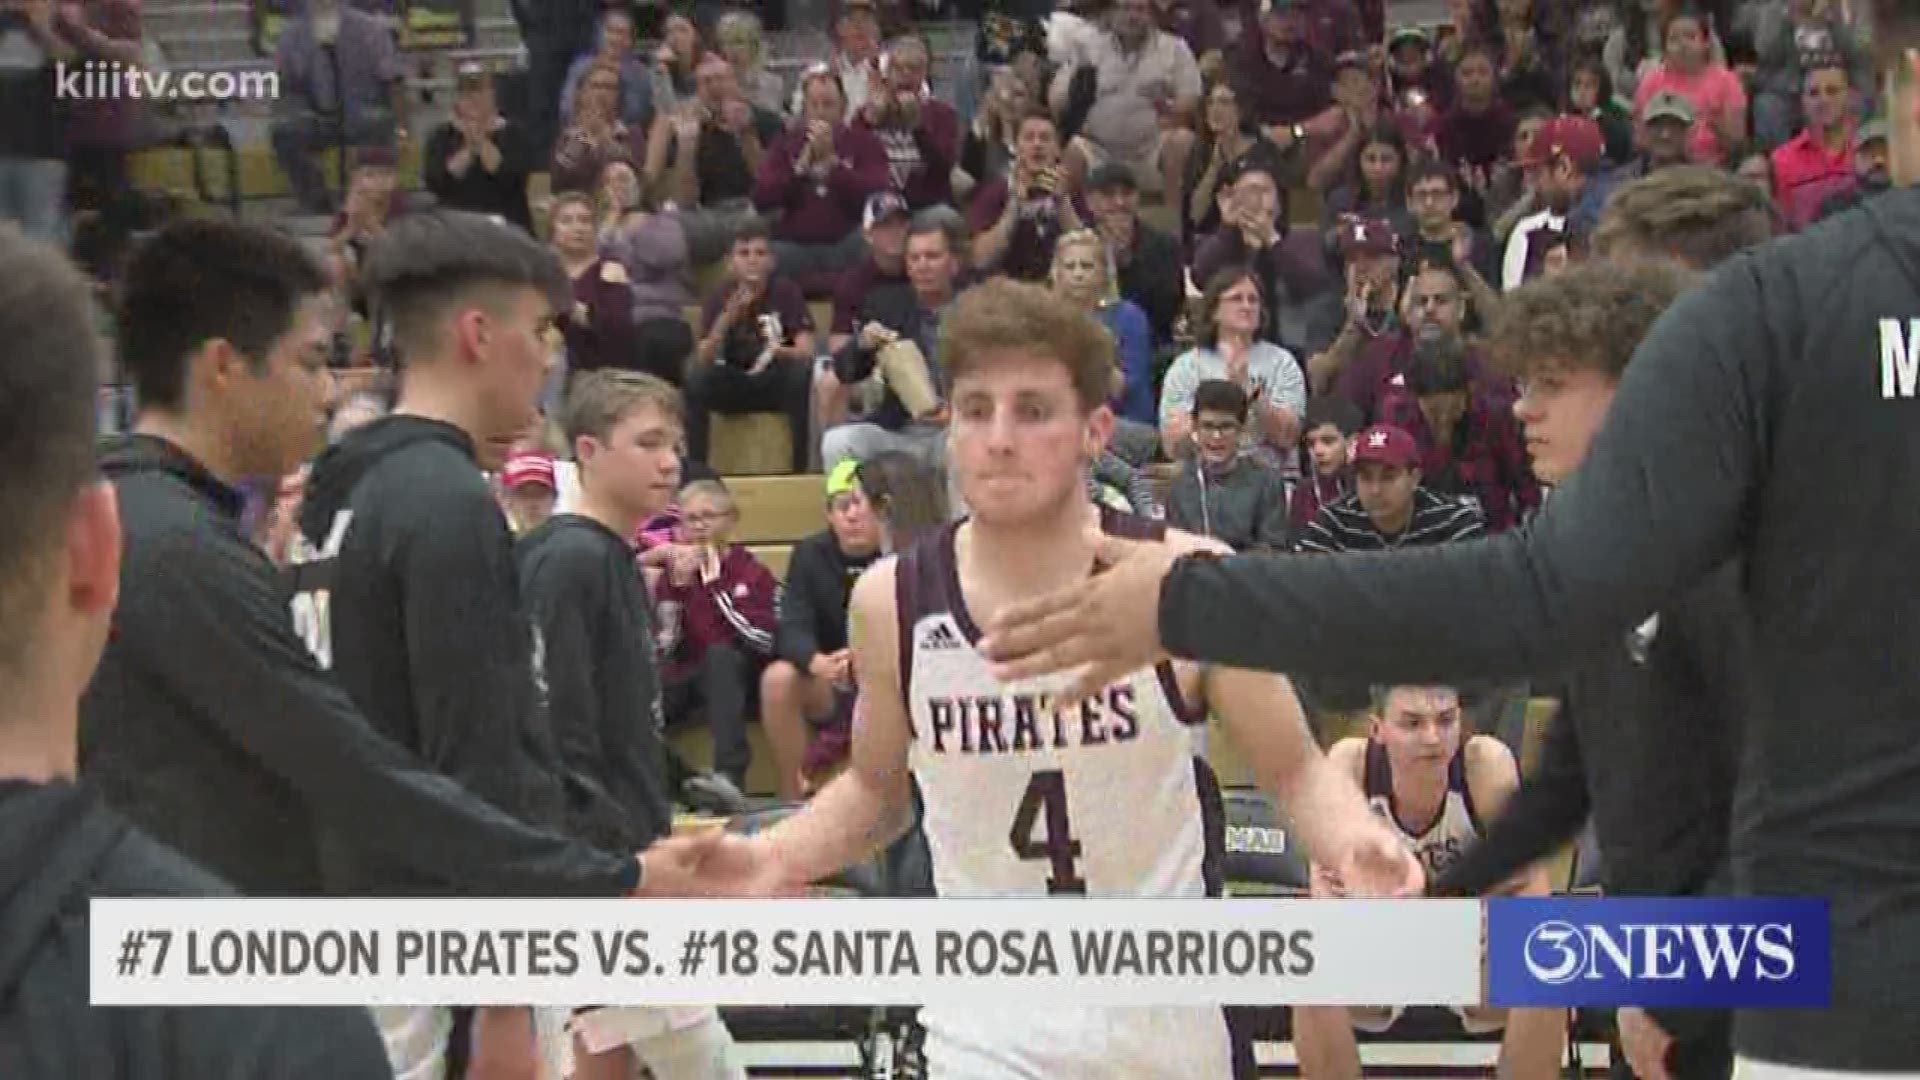 The London Pirates punched their ticket to the region semis Monday night with a 86-69 win over Santa Rosa.